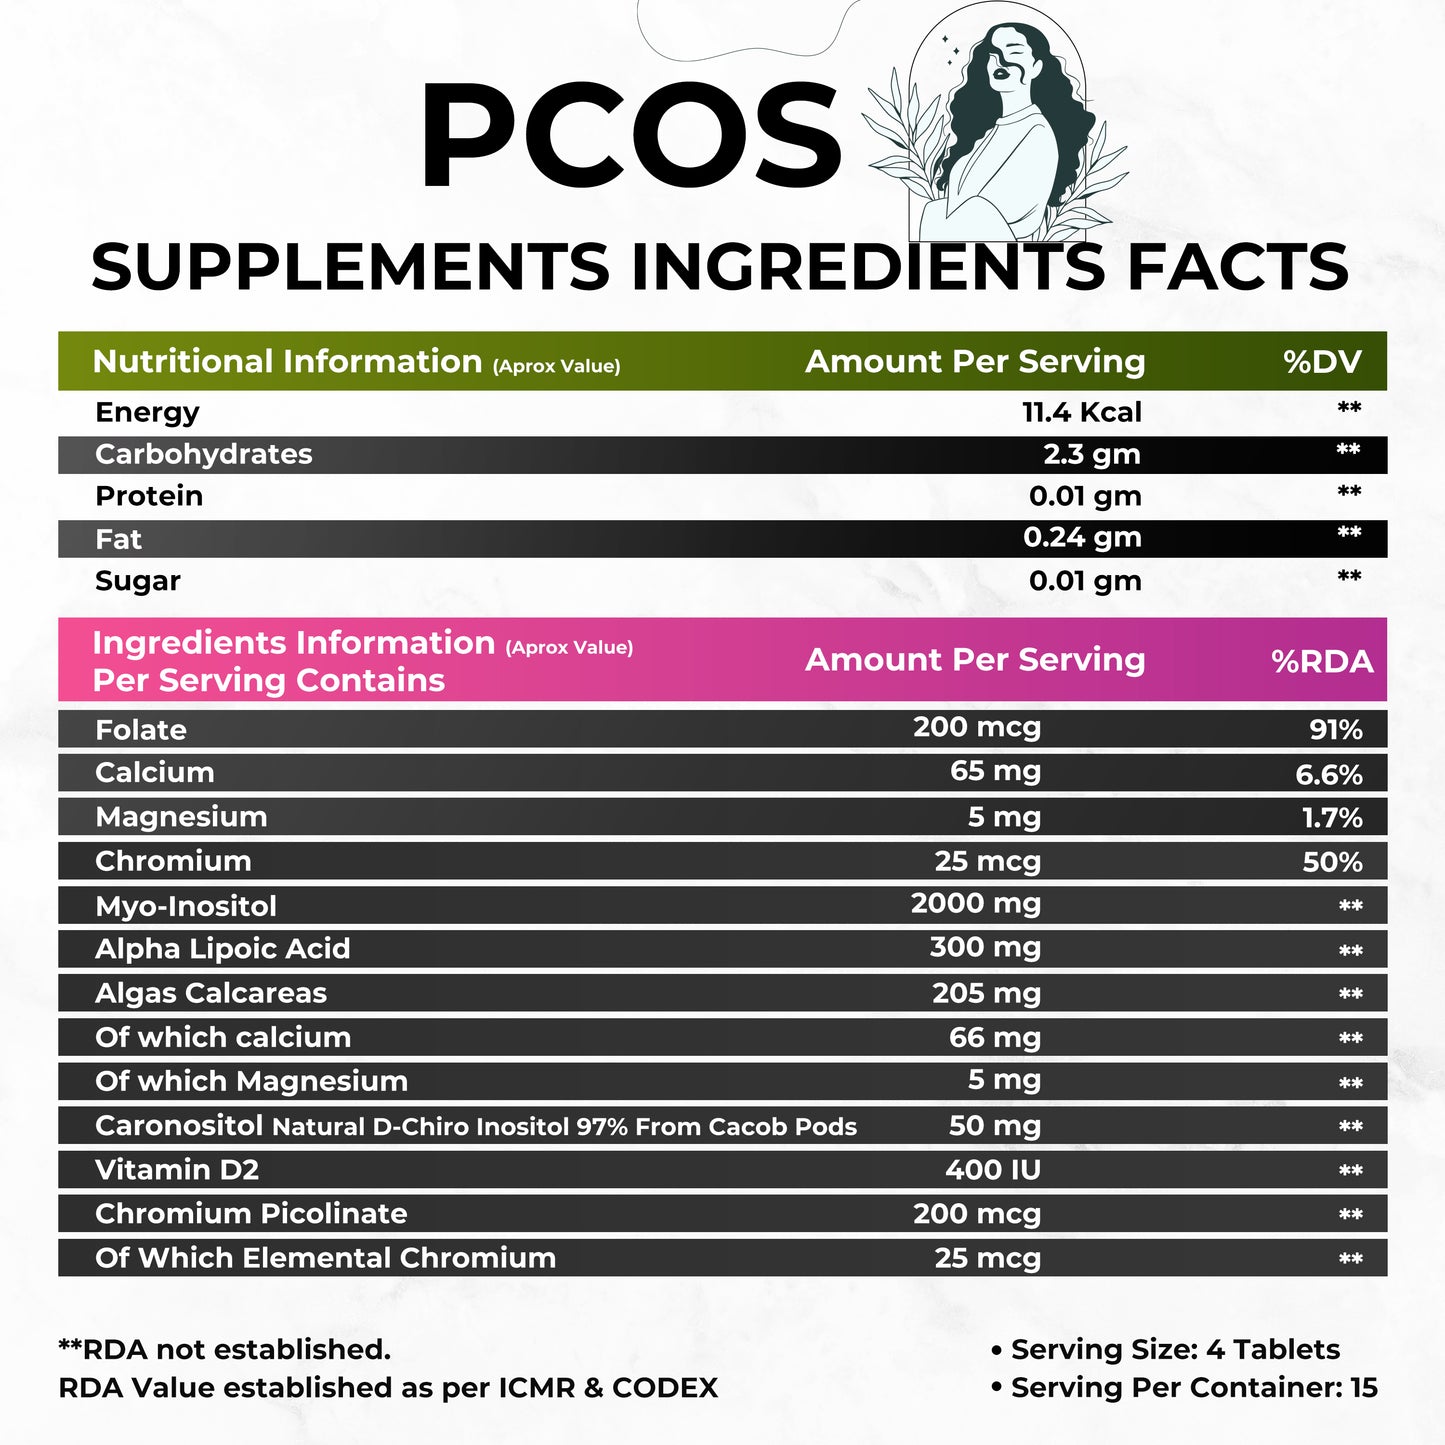 Health Veda Organics PCOS Supplement 1100 mg | Regularize Menstrual Cycle, Balance Hormonal Levels, Reduces Acne | 60 Veg Tablets for Women